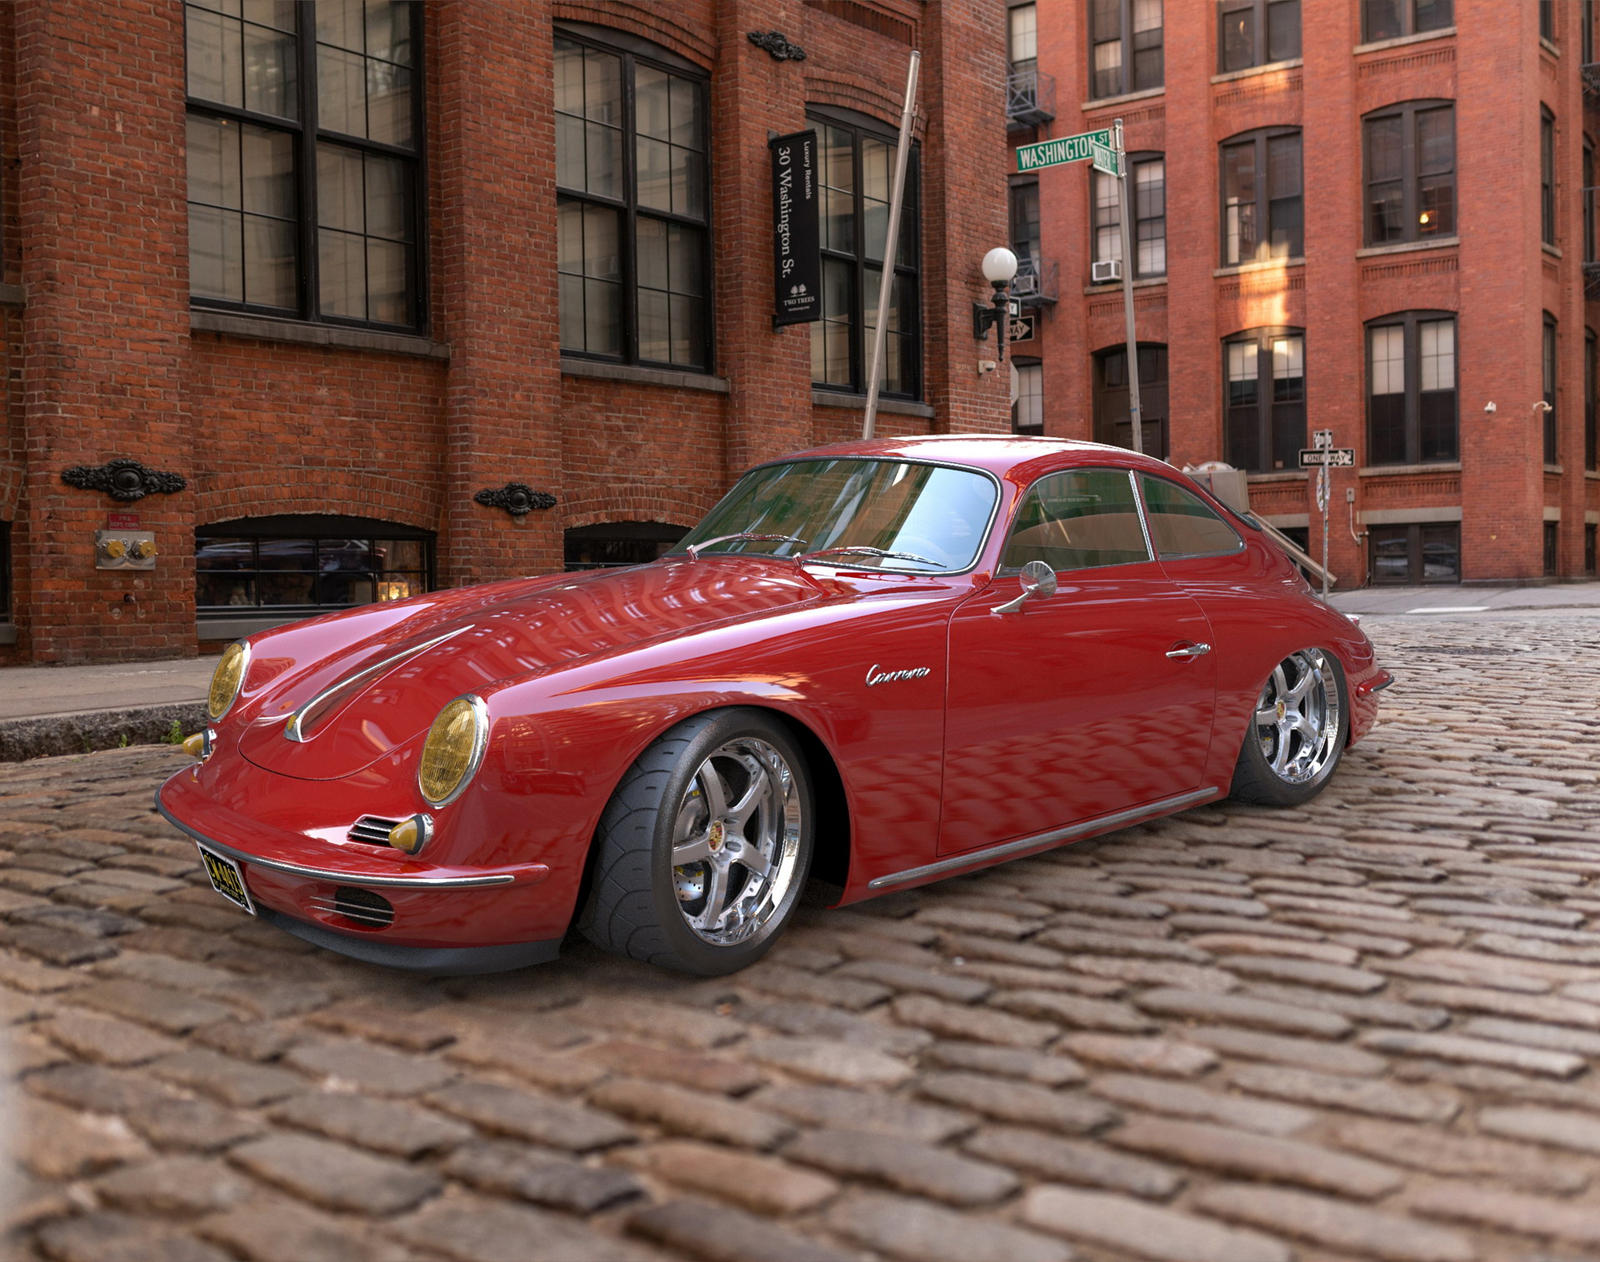 photo of This Porsche 356 Restomod Will Have A Carbon-Fiber Body On A 911 Chassis image